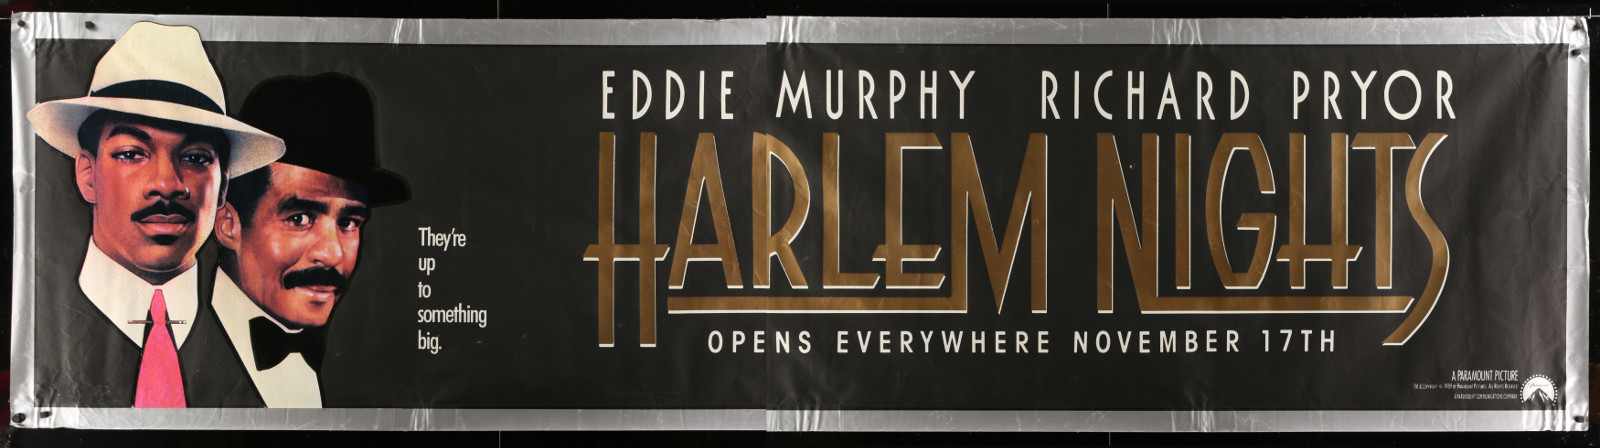 Harlem Nights 2A151 A Part Of A Lot 5 Vinyl Banners '88-90 Great Images From A Variety Of Different Movies!